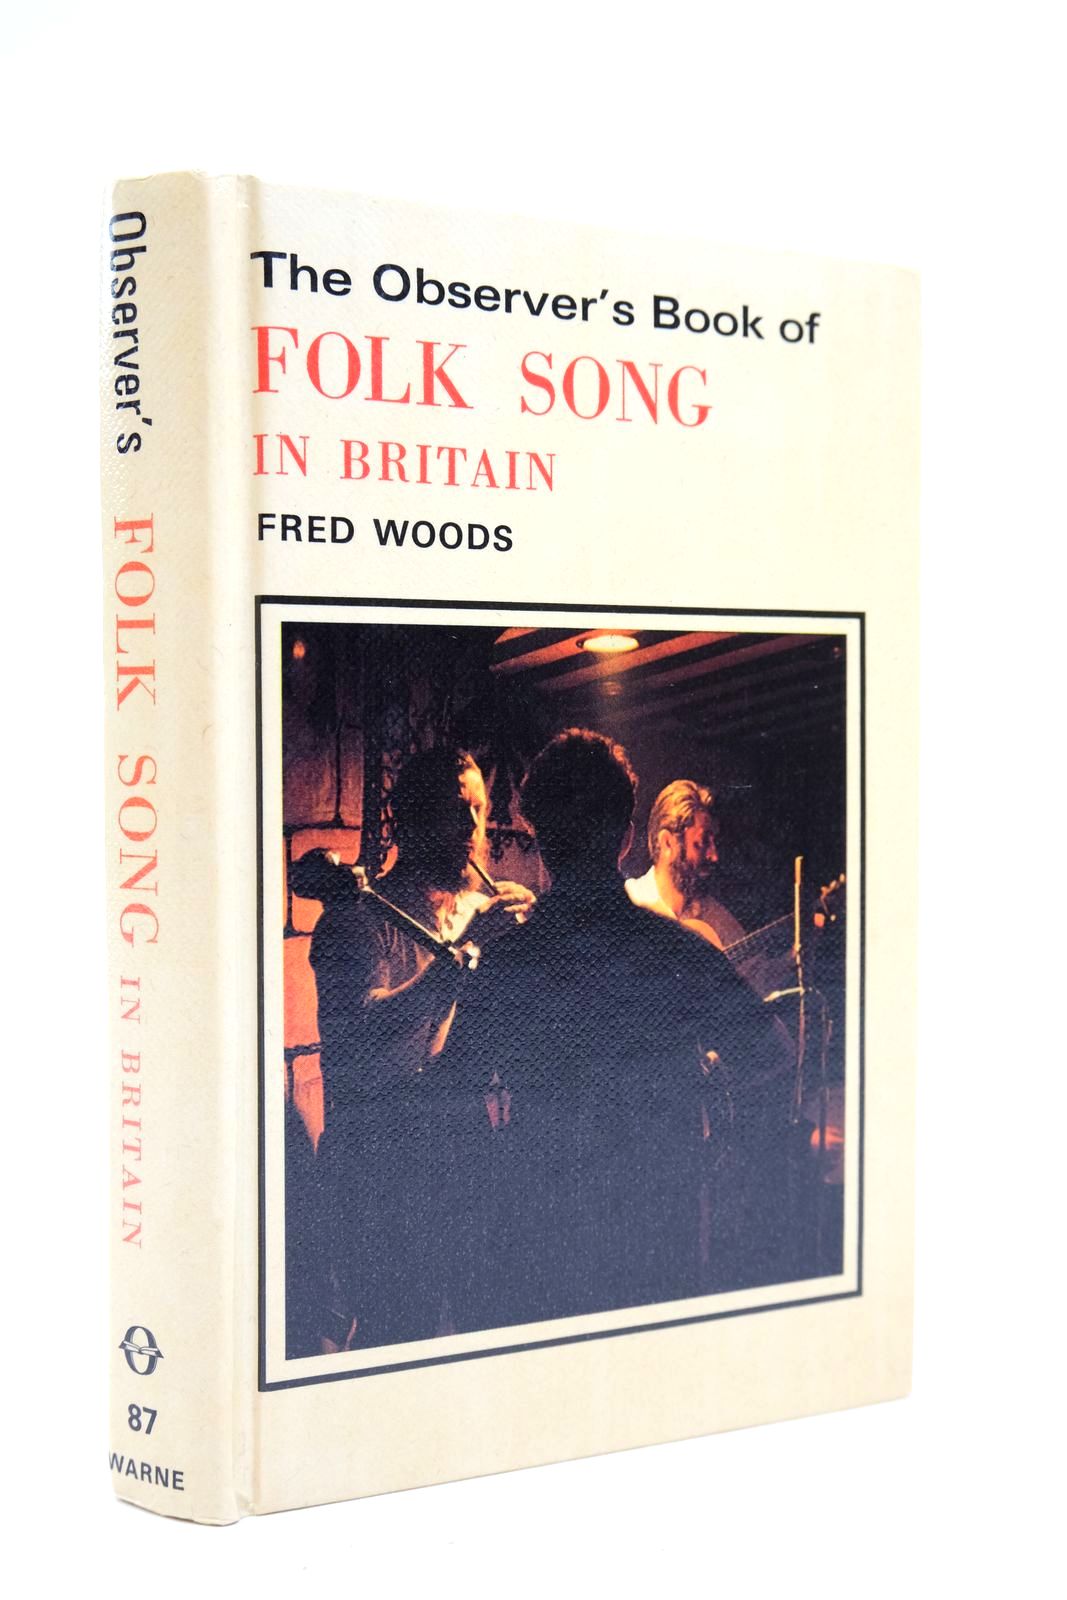 Photo of THE OBSERVER'S BOOK OF FOLK SONG IN BRITAIN written by Woods, Fred published by Frederick Warne &amp; Co Ltd. (STOCK CODE: 2140950)  for sale by Stella & Rose's Books